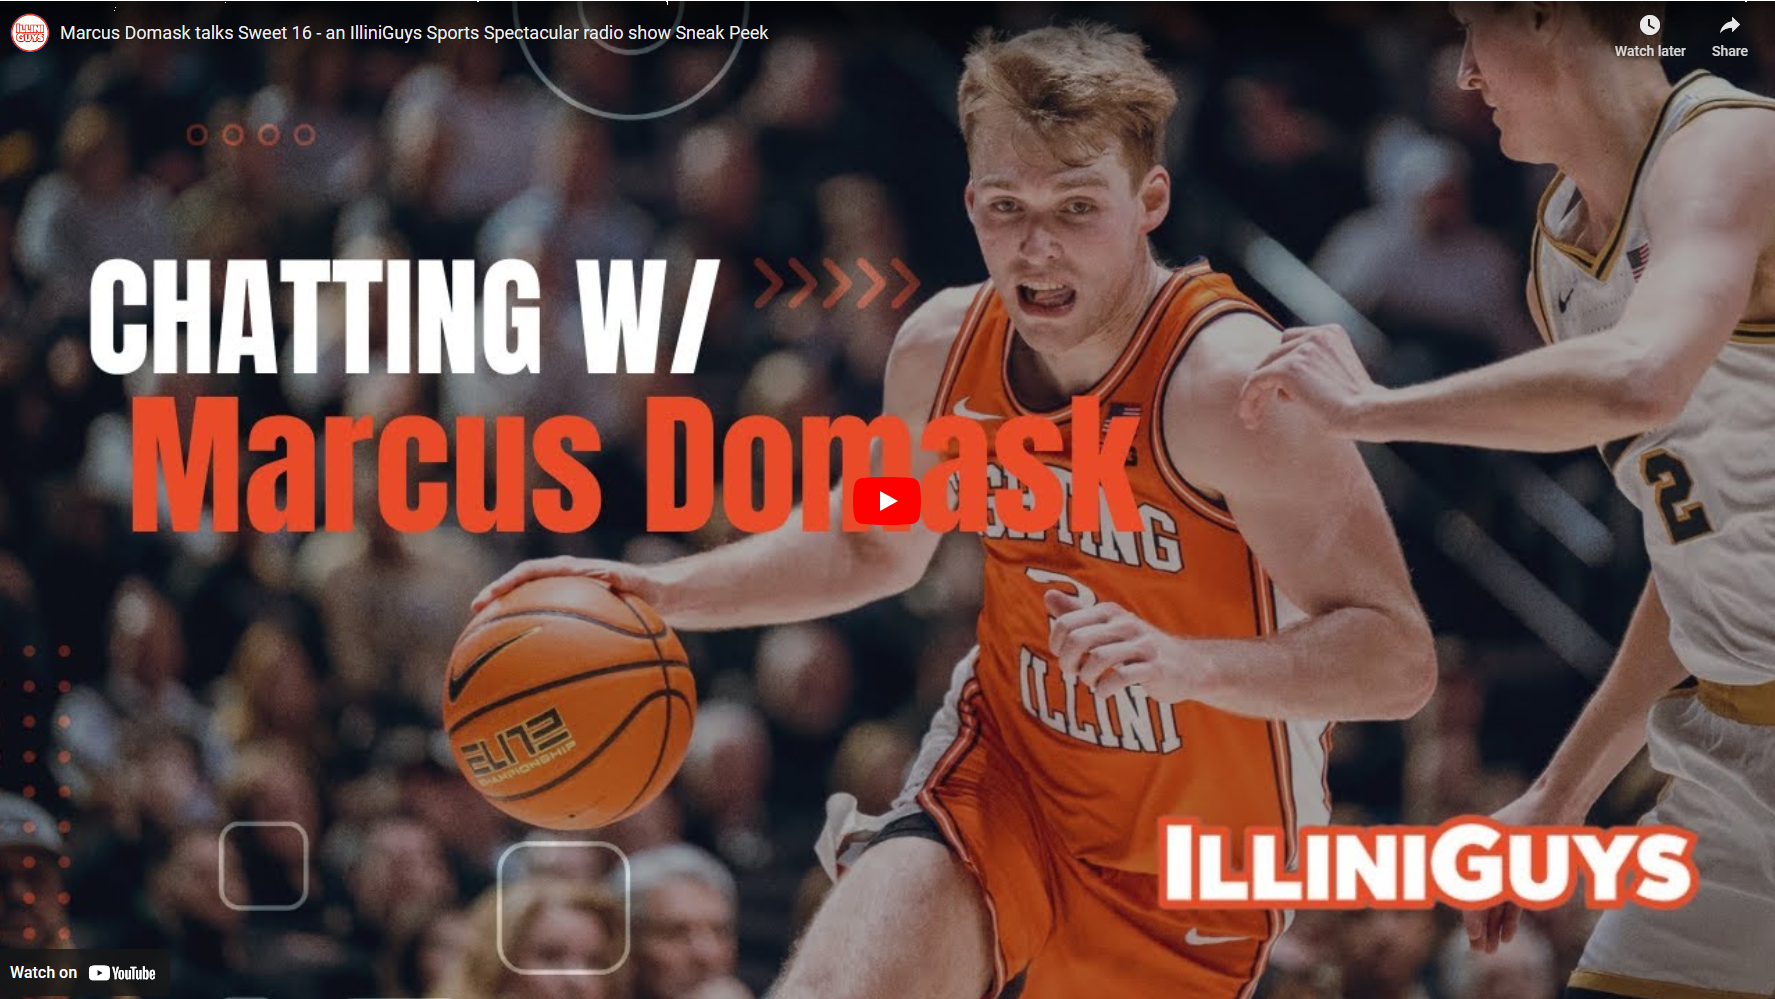 Marcus Domask talks Sweet 16 with the IlliniGuys, Presented By HX Home Solutions